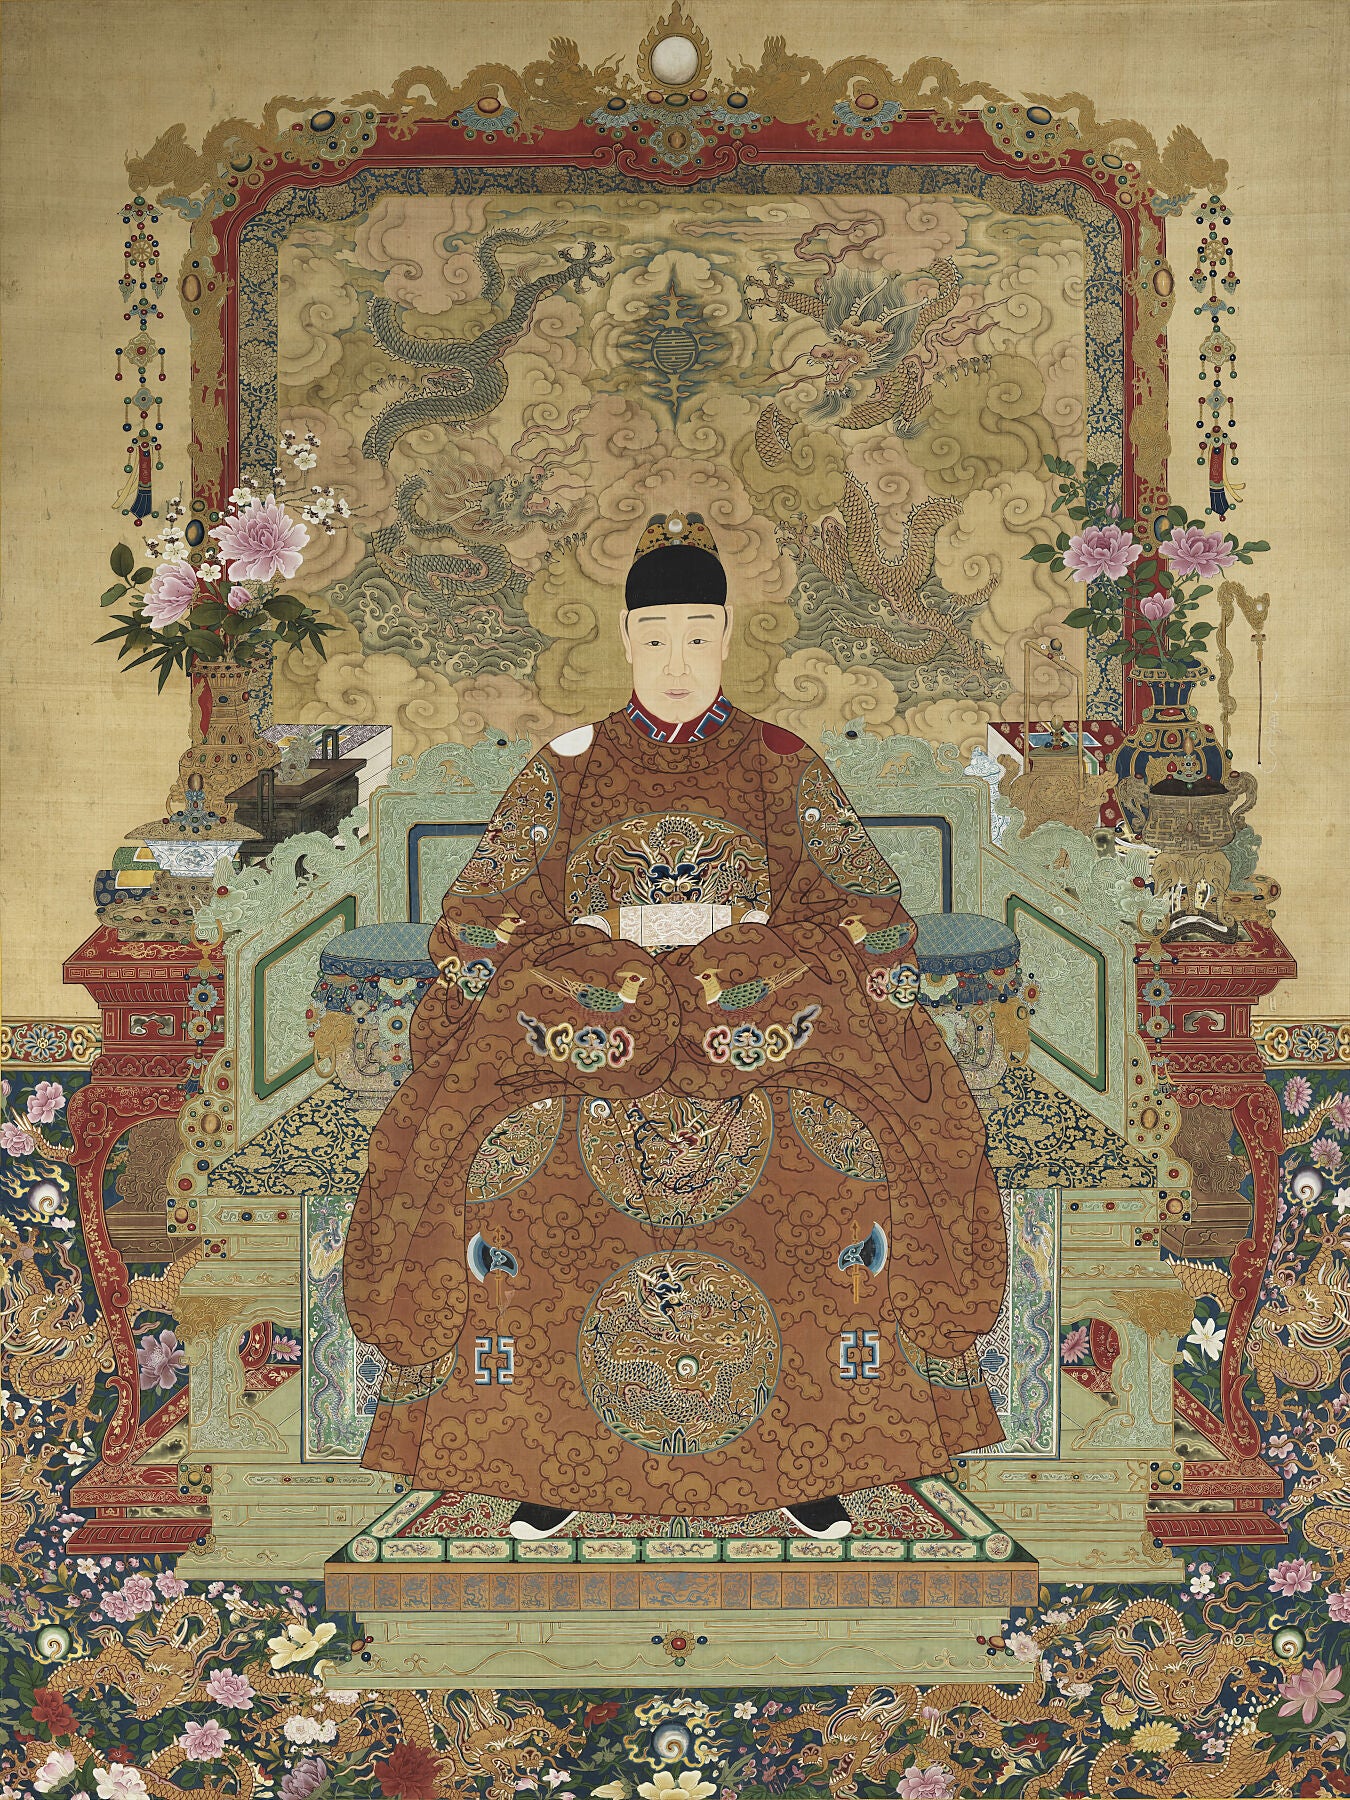 Emperor Zhe, Emperor Xizong, or better known as the Tianqi Emperor in the US. Ming dynasty after 1620